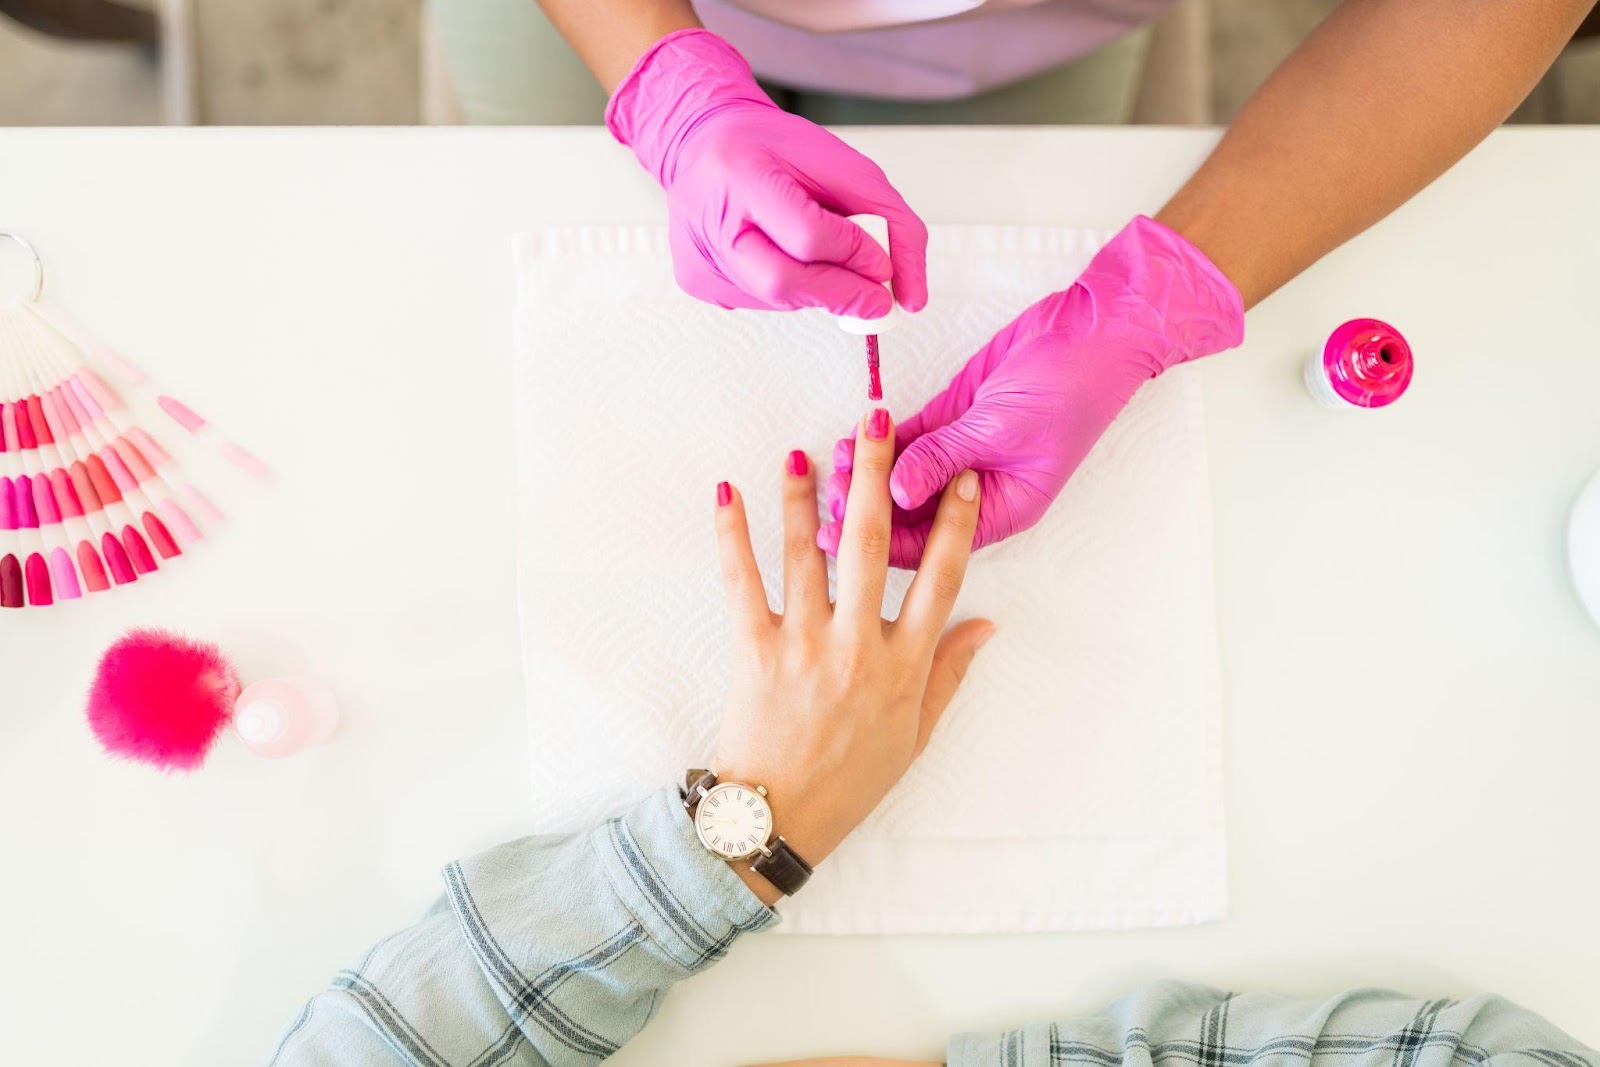 The global nail care industry generates more than USD10 billion annually.